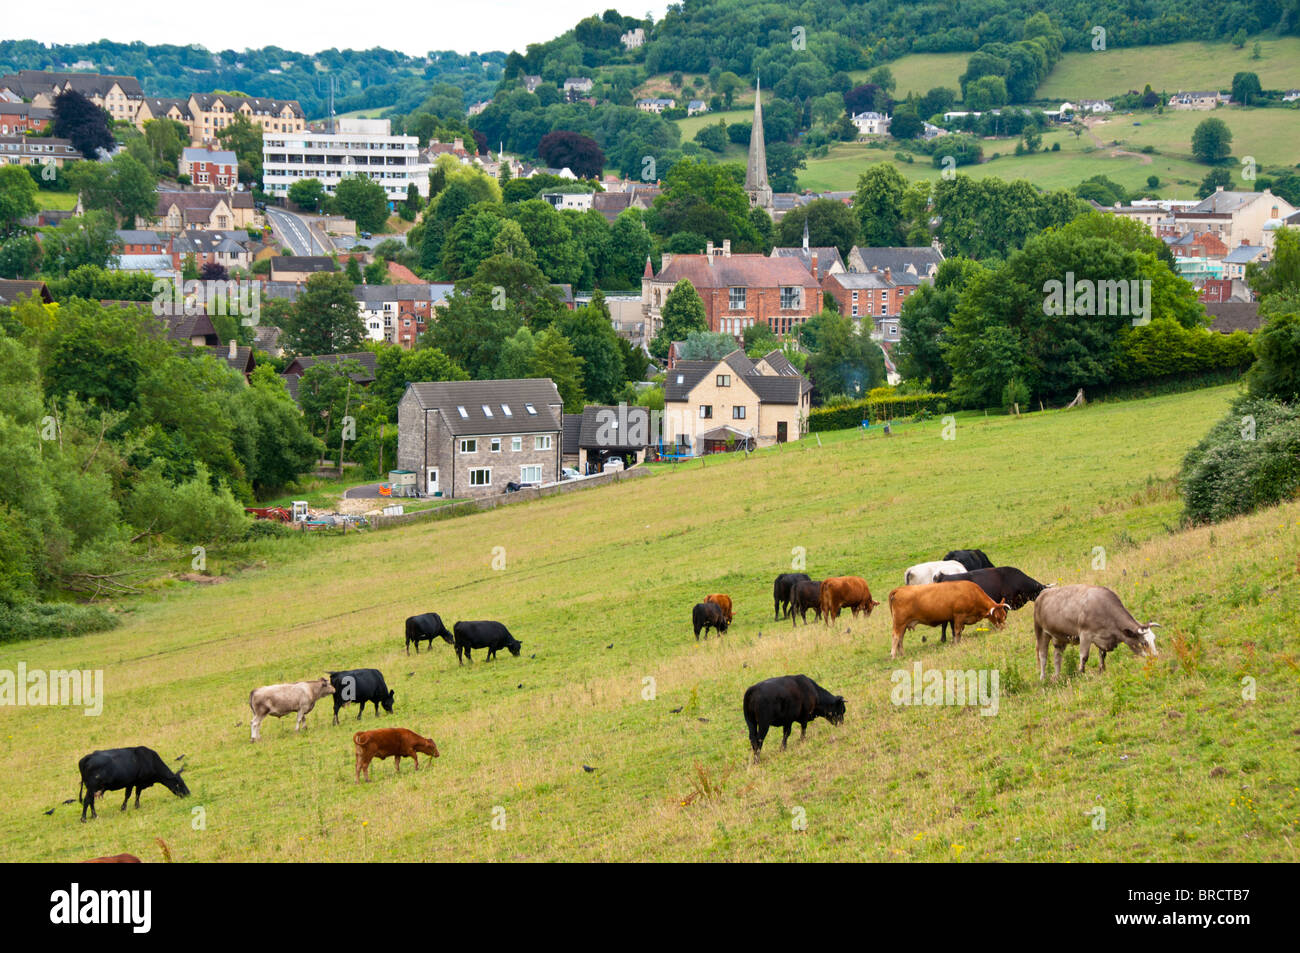 Cows grazing in a field, Stroud, Gloucestershire, Cotswolds, UK Stock Photo